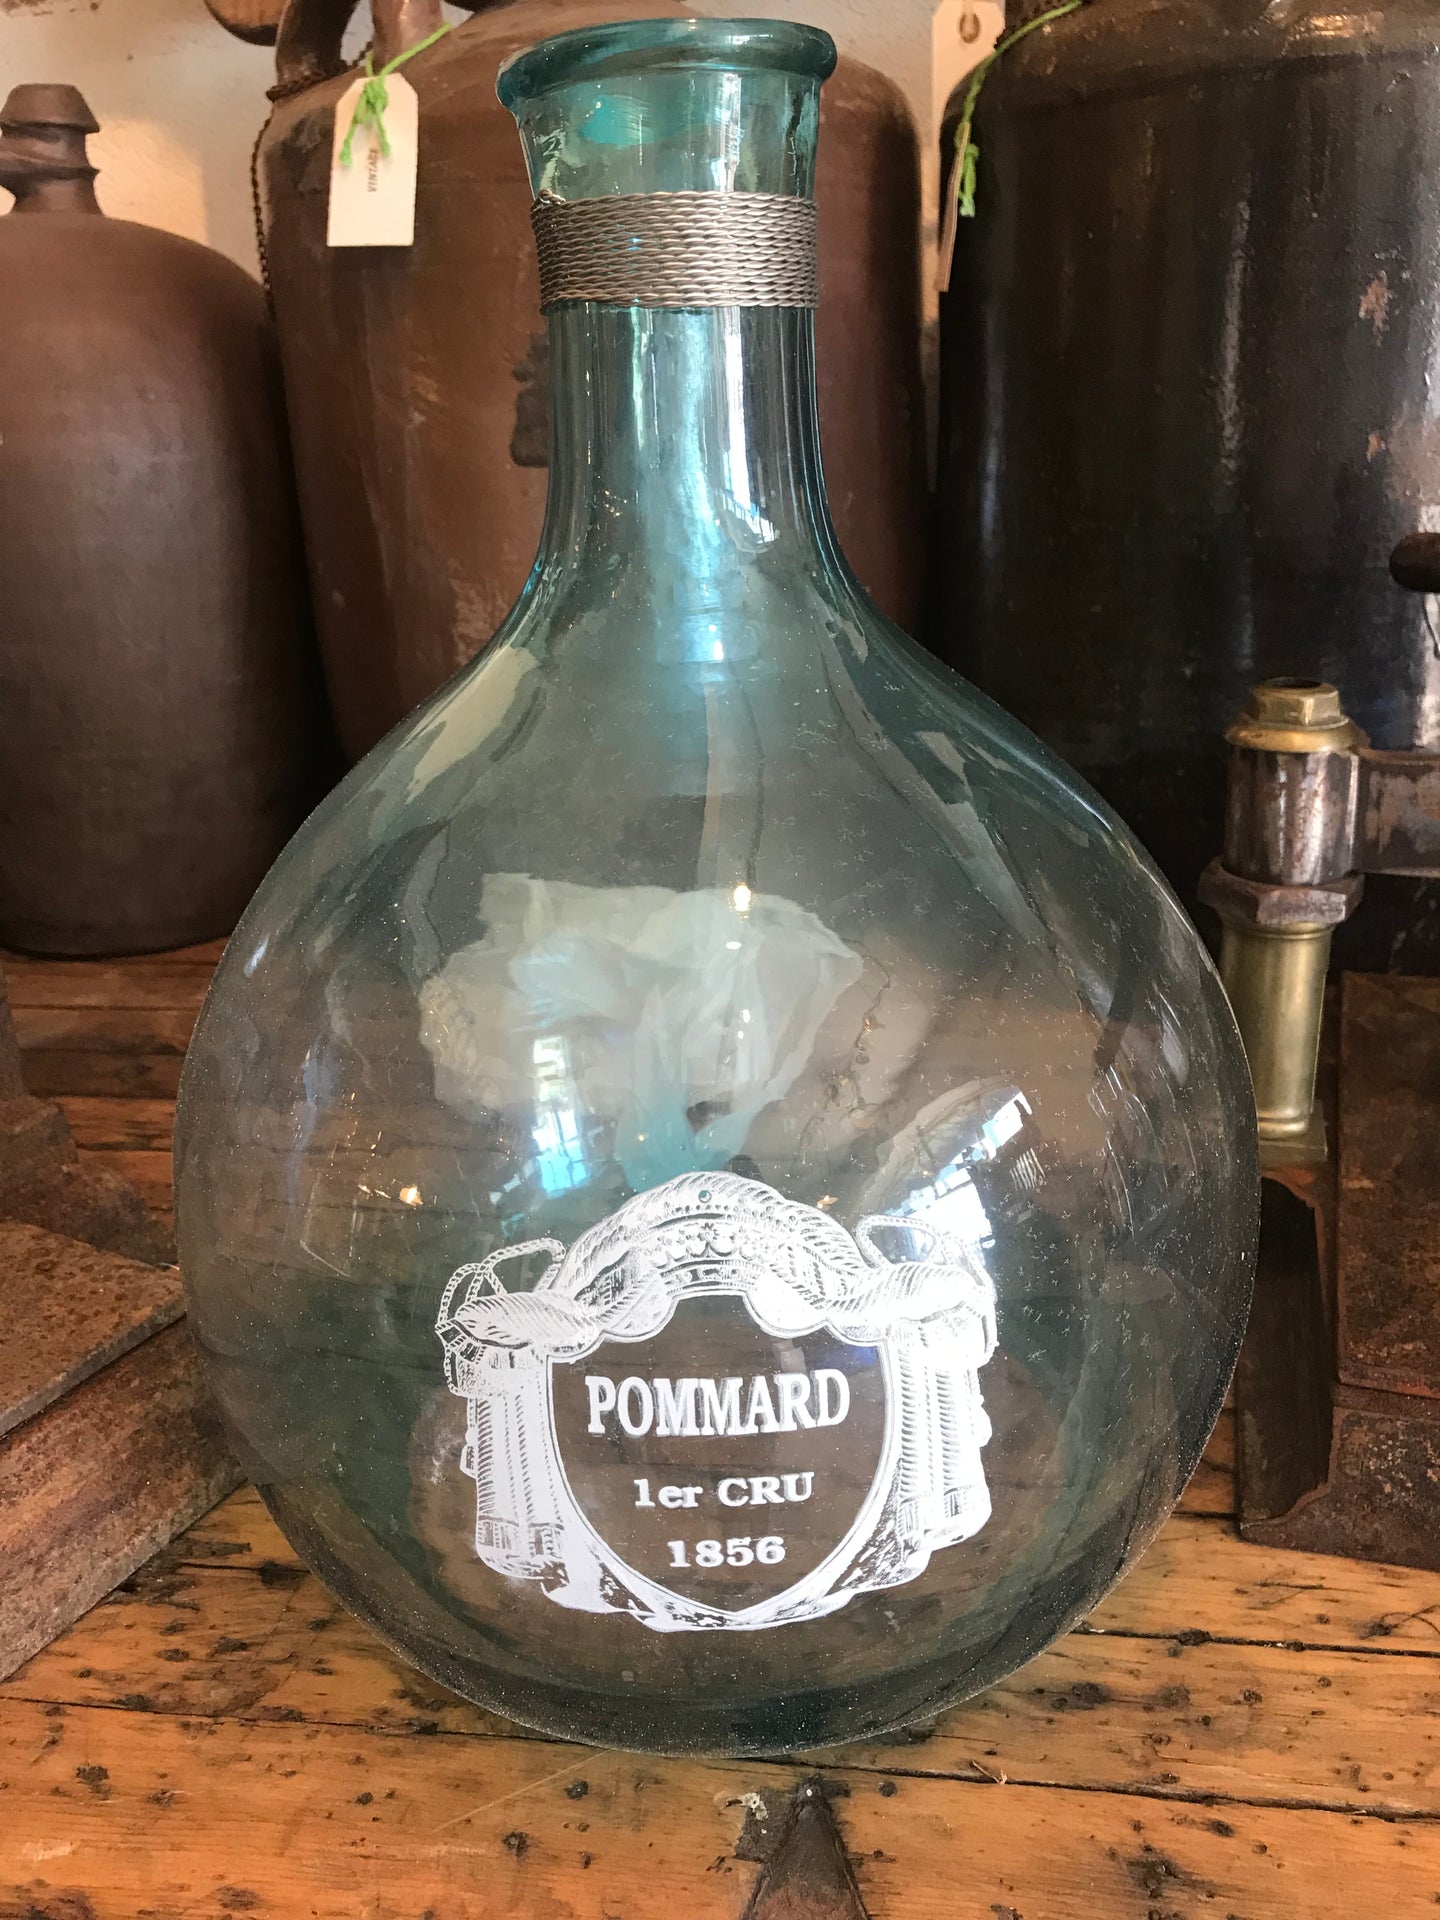 Teal Tinted “Pommard” demijohn from France